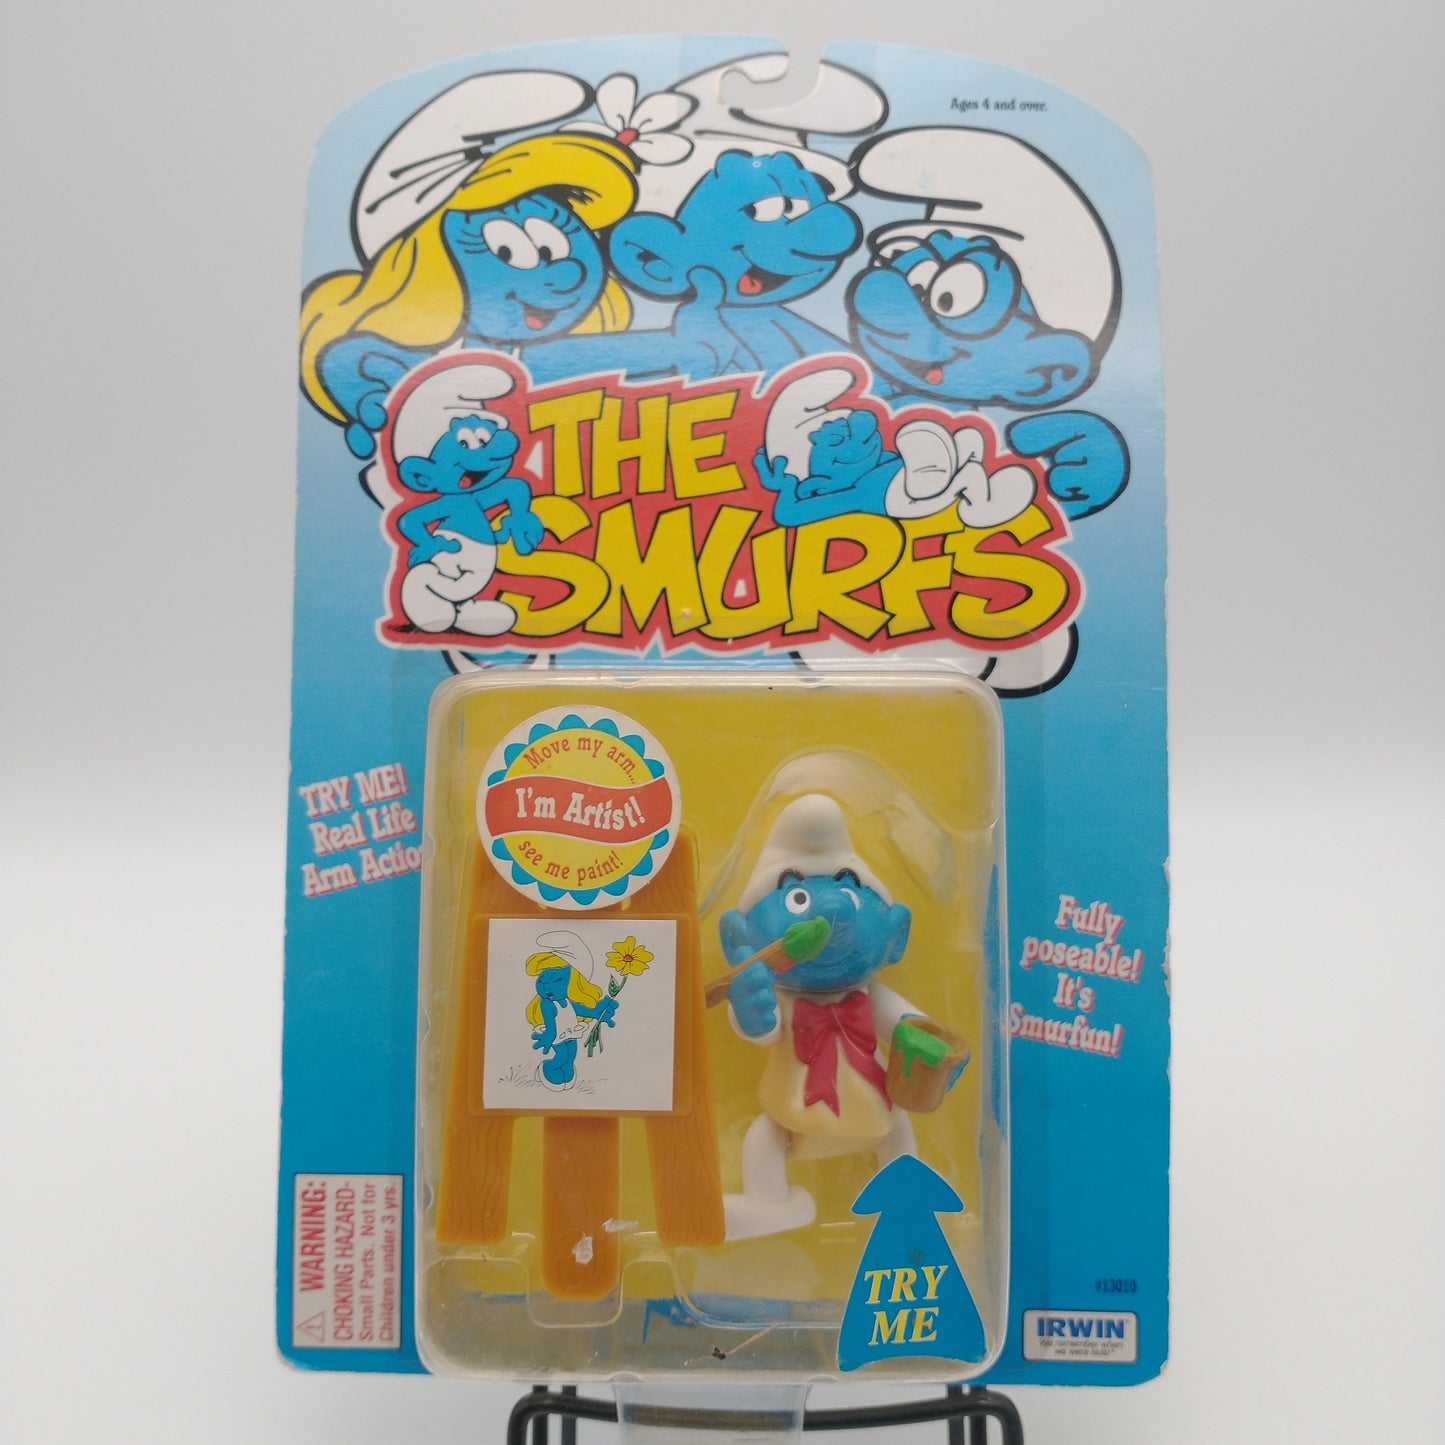 The front of the card and bubble. The figure is sealed inside.